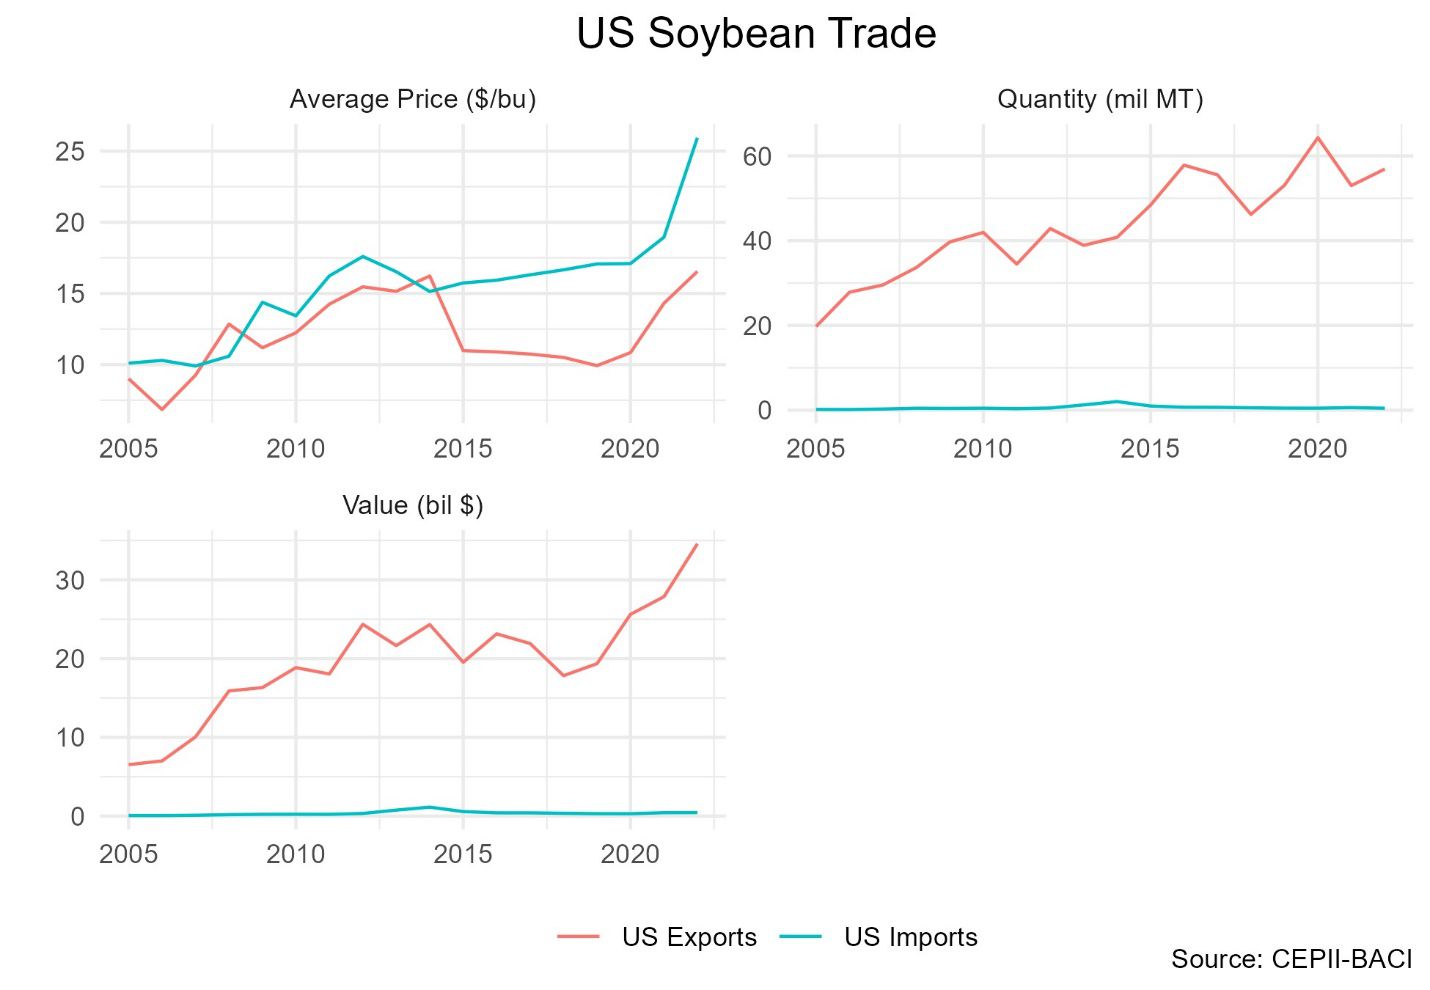 Graphs of US Soybean Trade